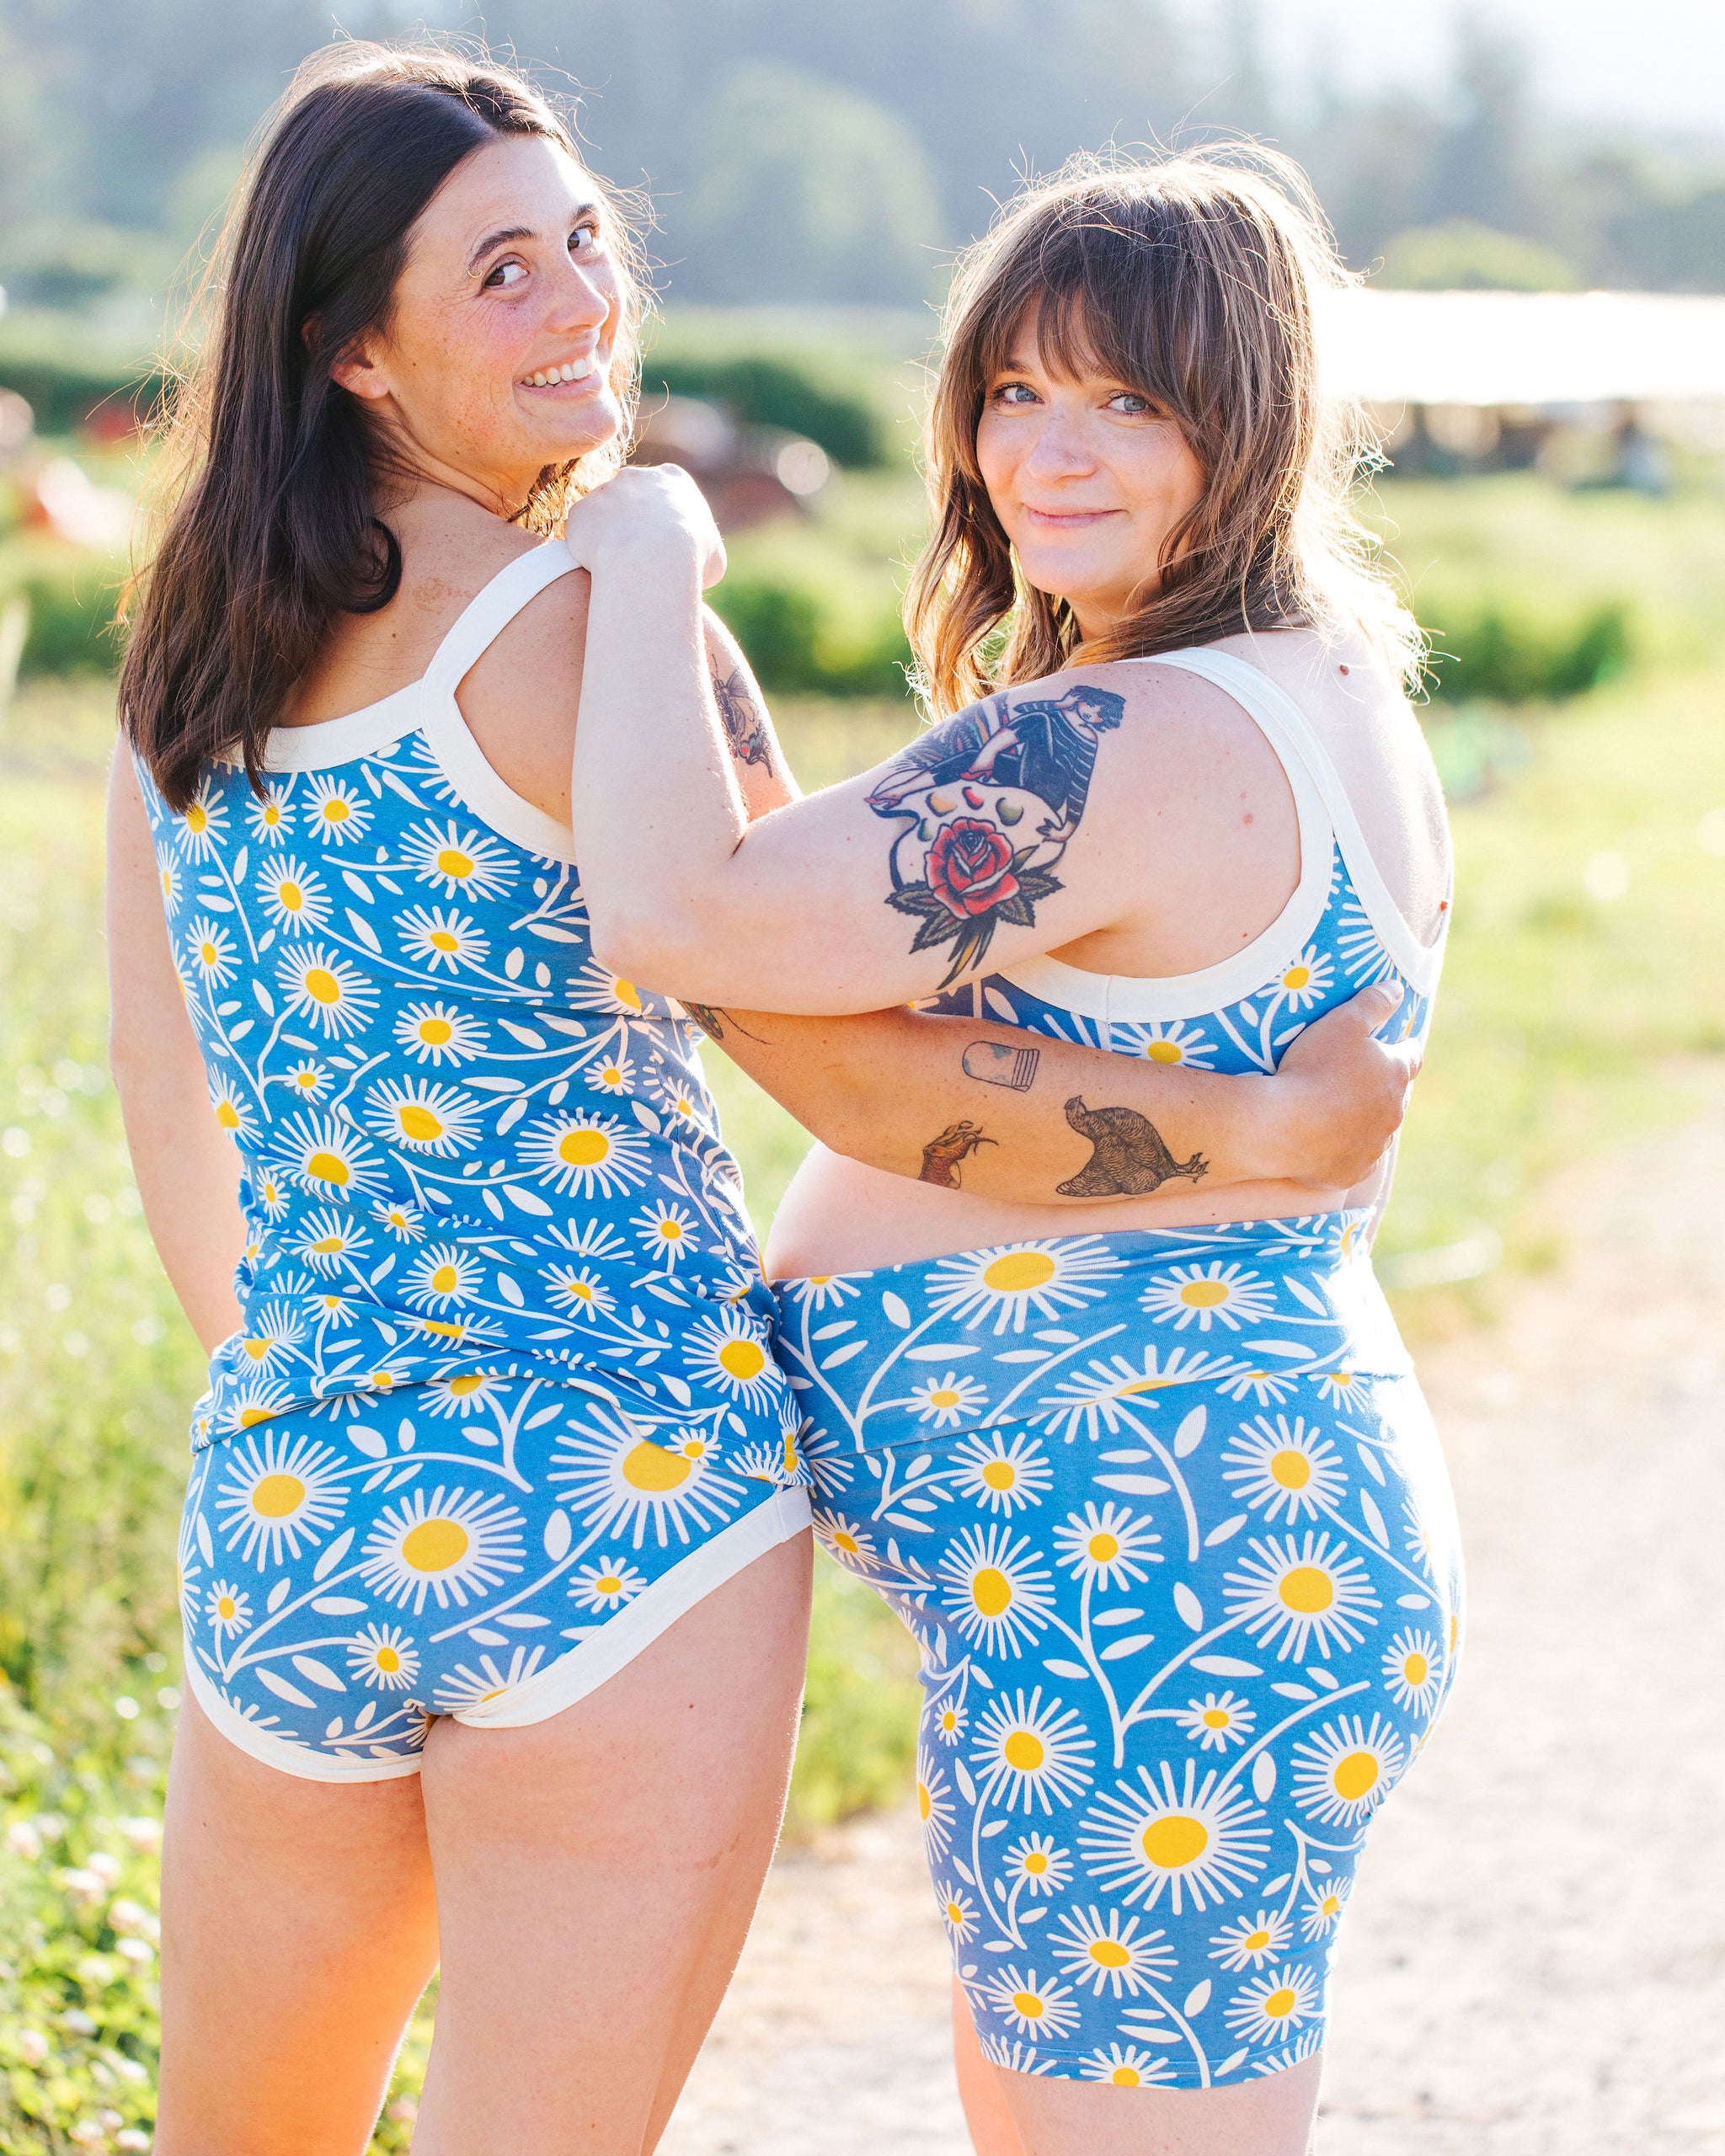 Two models smiling in a field wearing Thunderpants Bike Shorts in Daisy Days print: blue with white and yellow daisies.